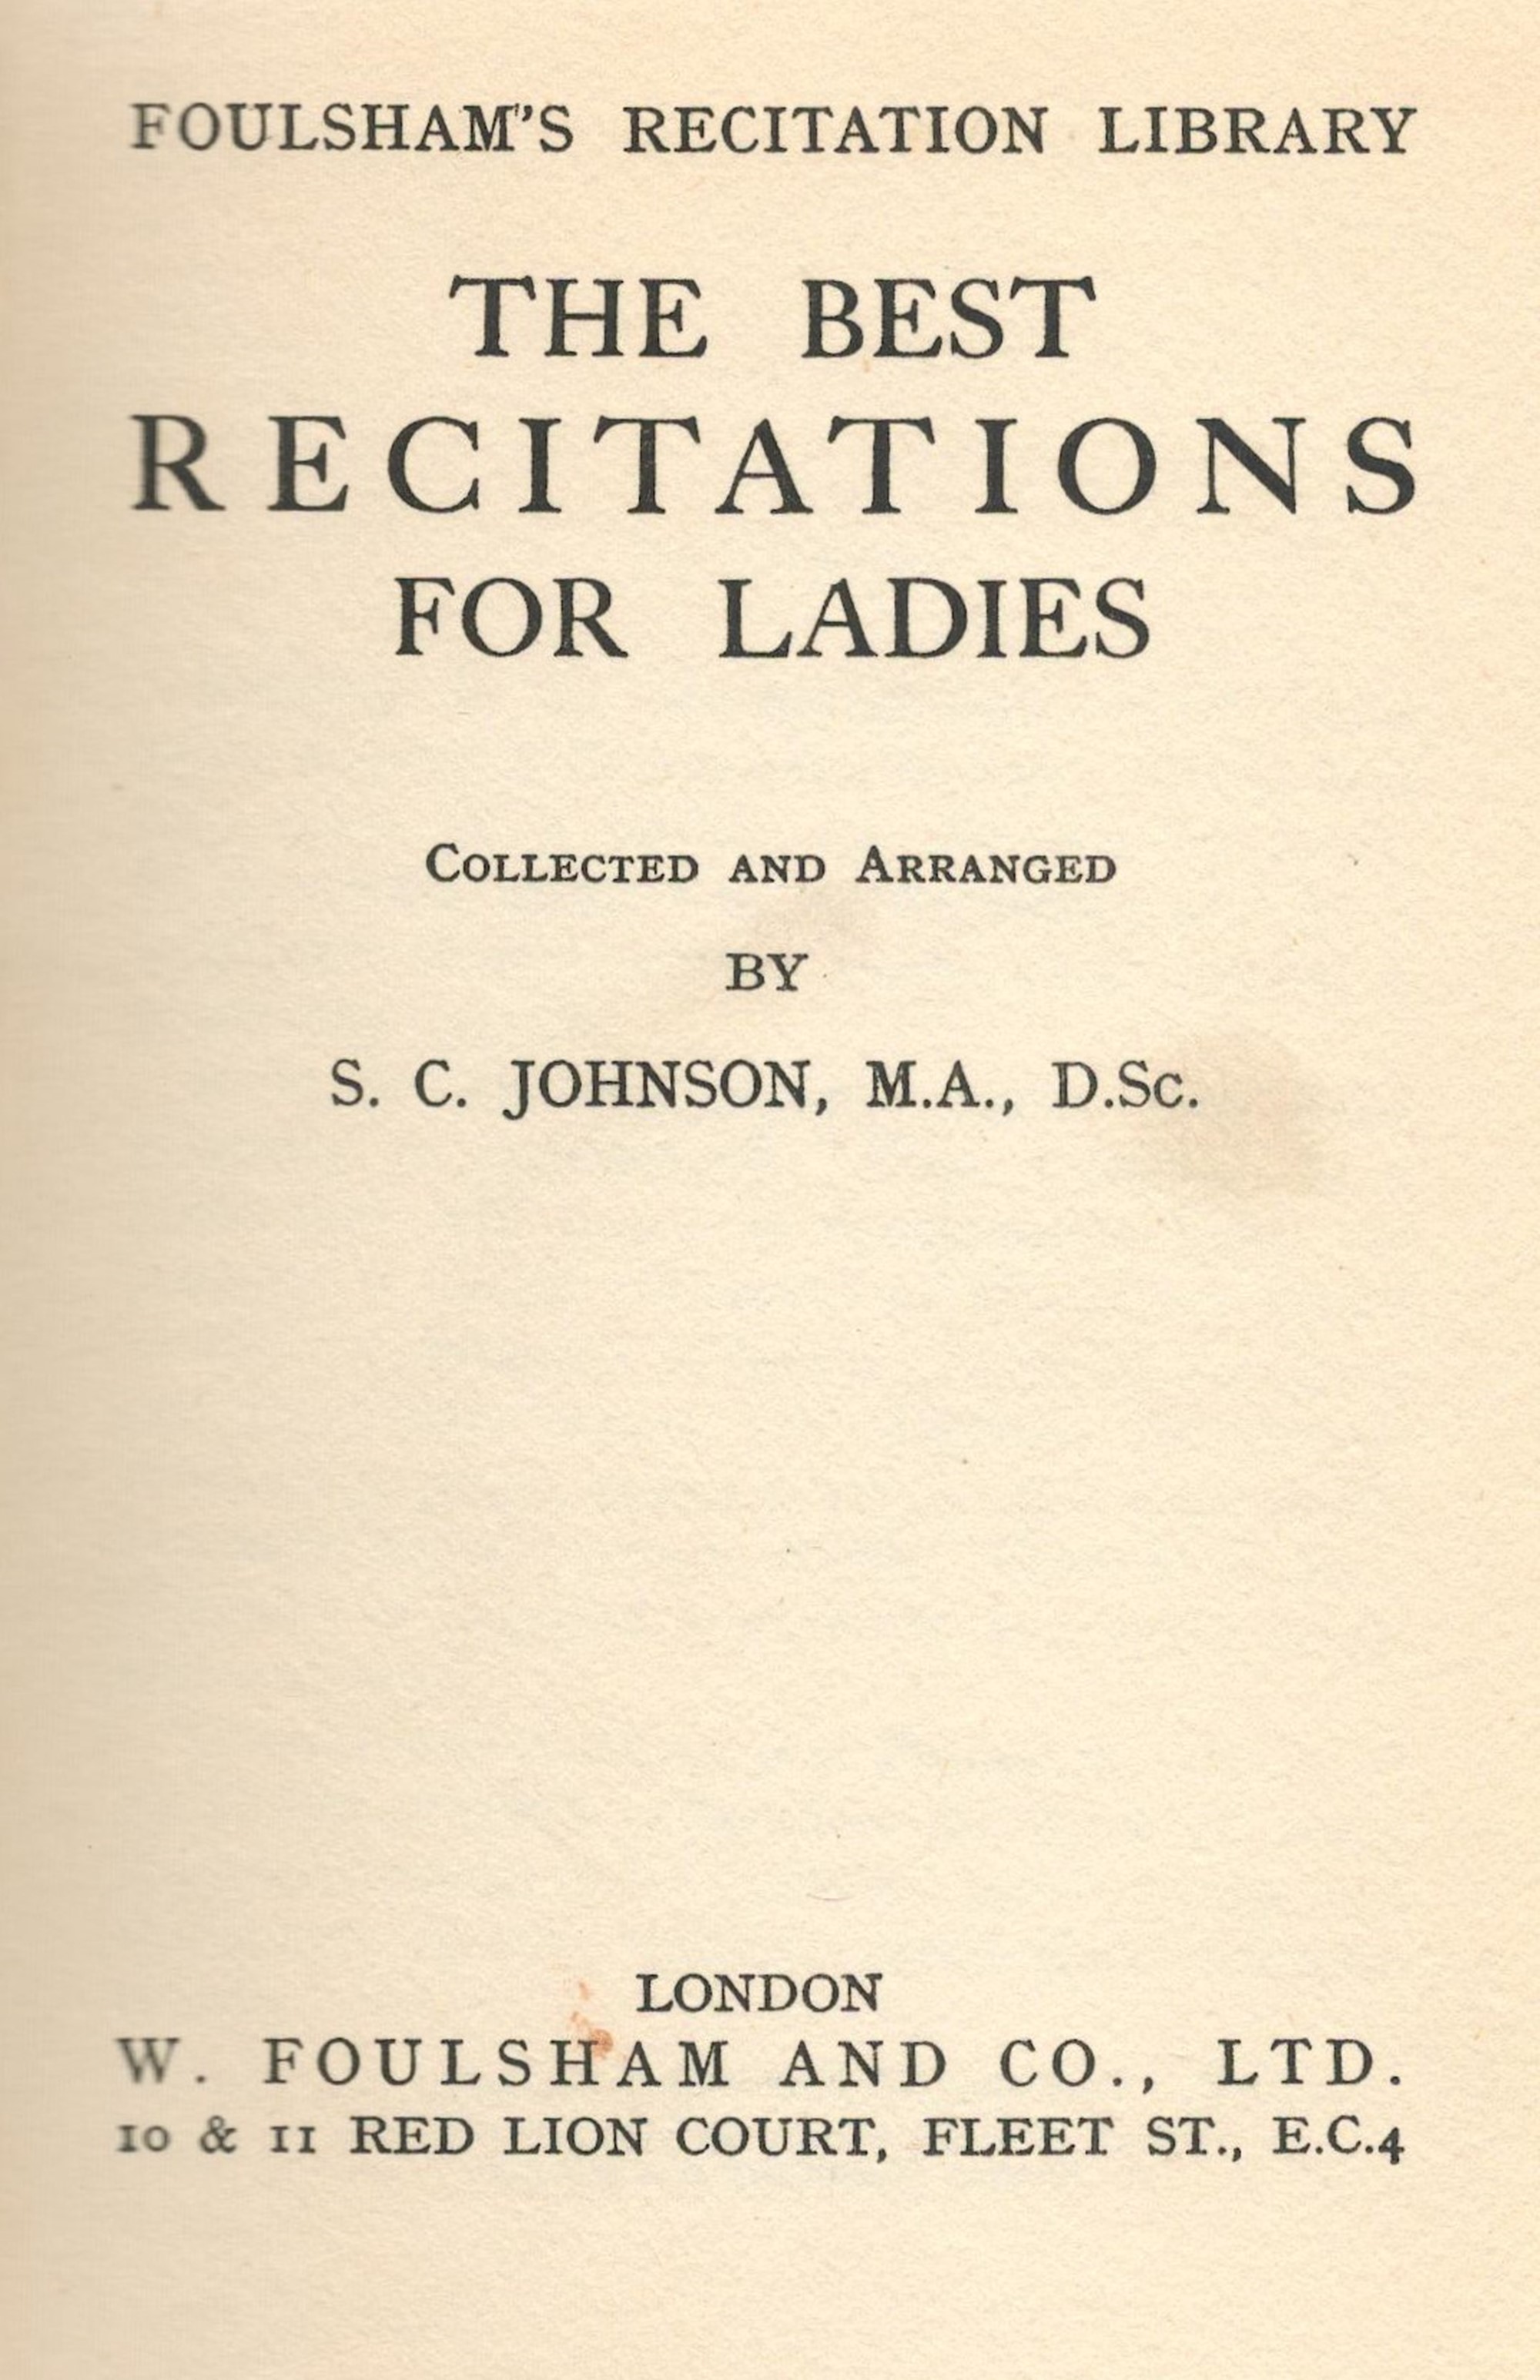 The Best Recitations for Ladies collected by S C Johnson M.A. Hardback Book date and edition unknown - Image 3 of 4